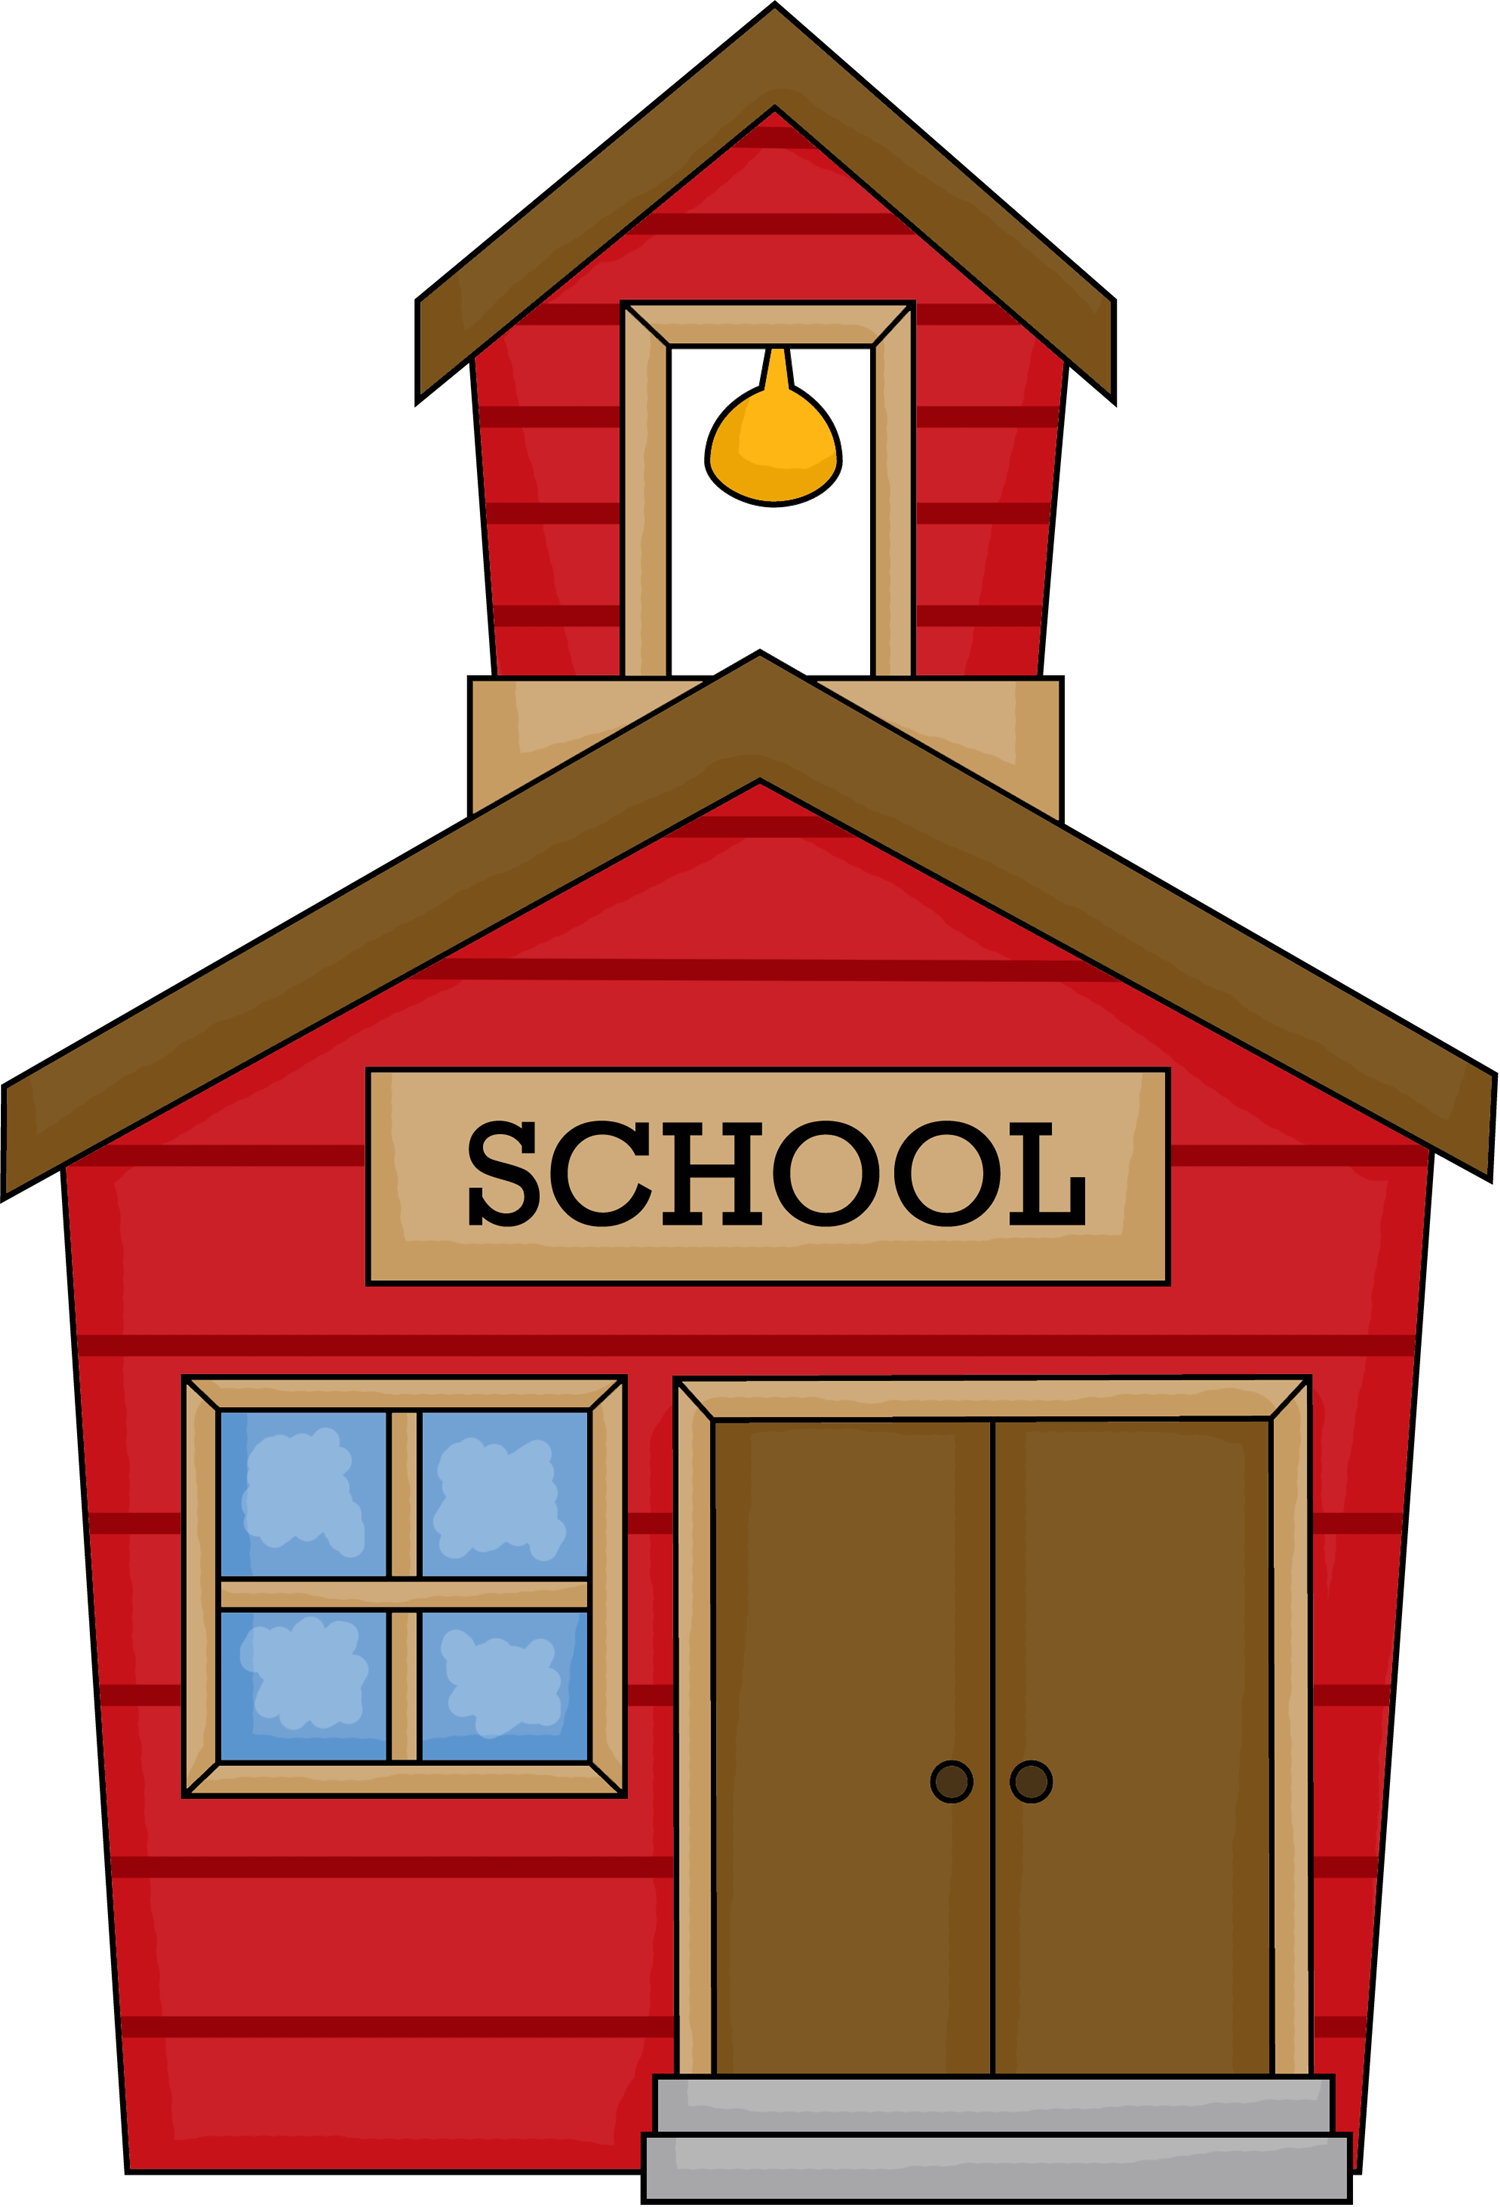 100+ Free School Clipart for your Education Projects